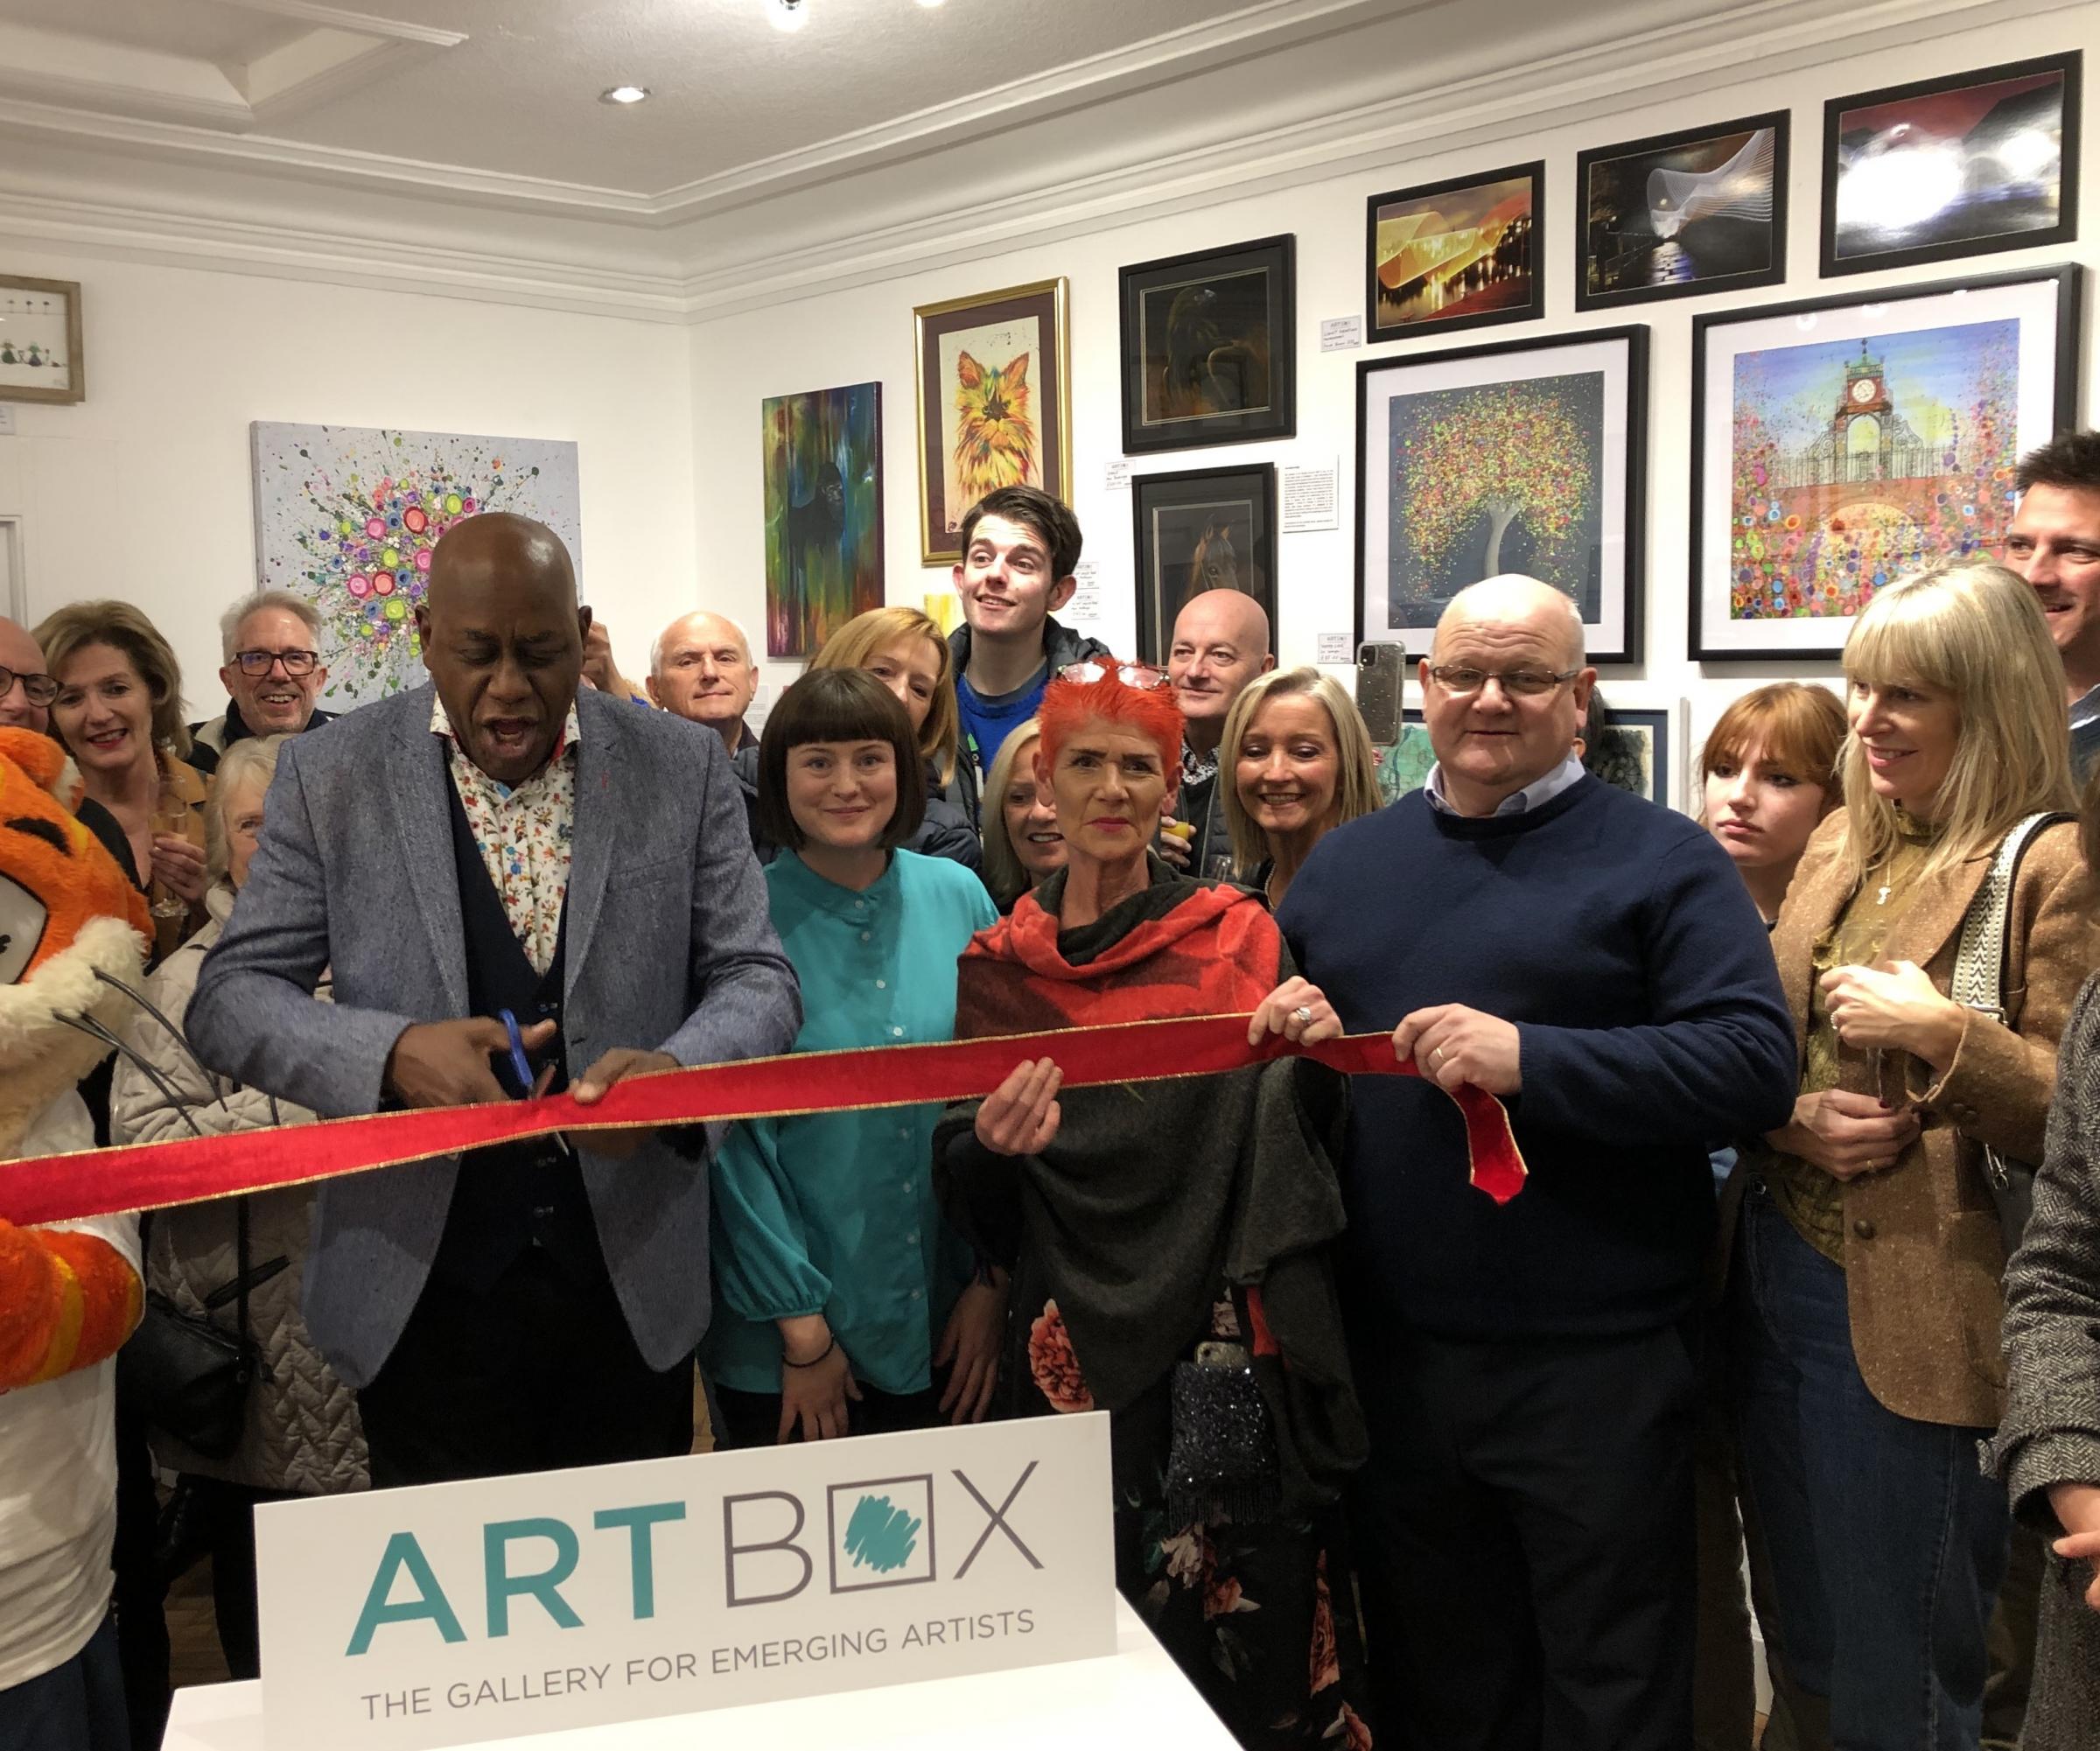 Art Box is officially opened in Chester, with Ainsley Harriott in attendance.